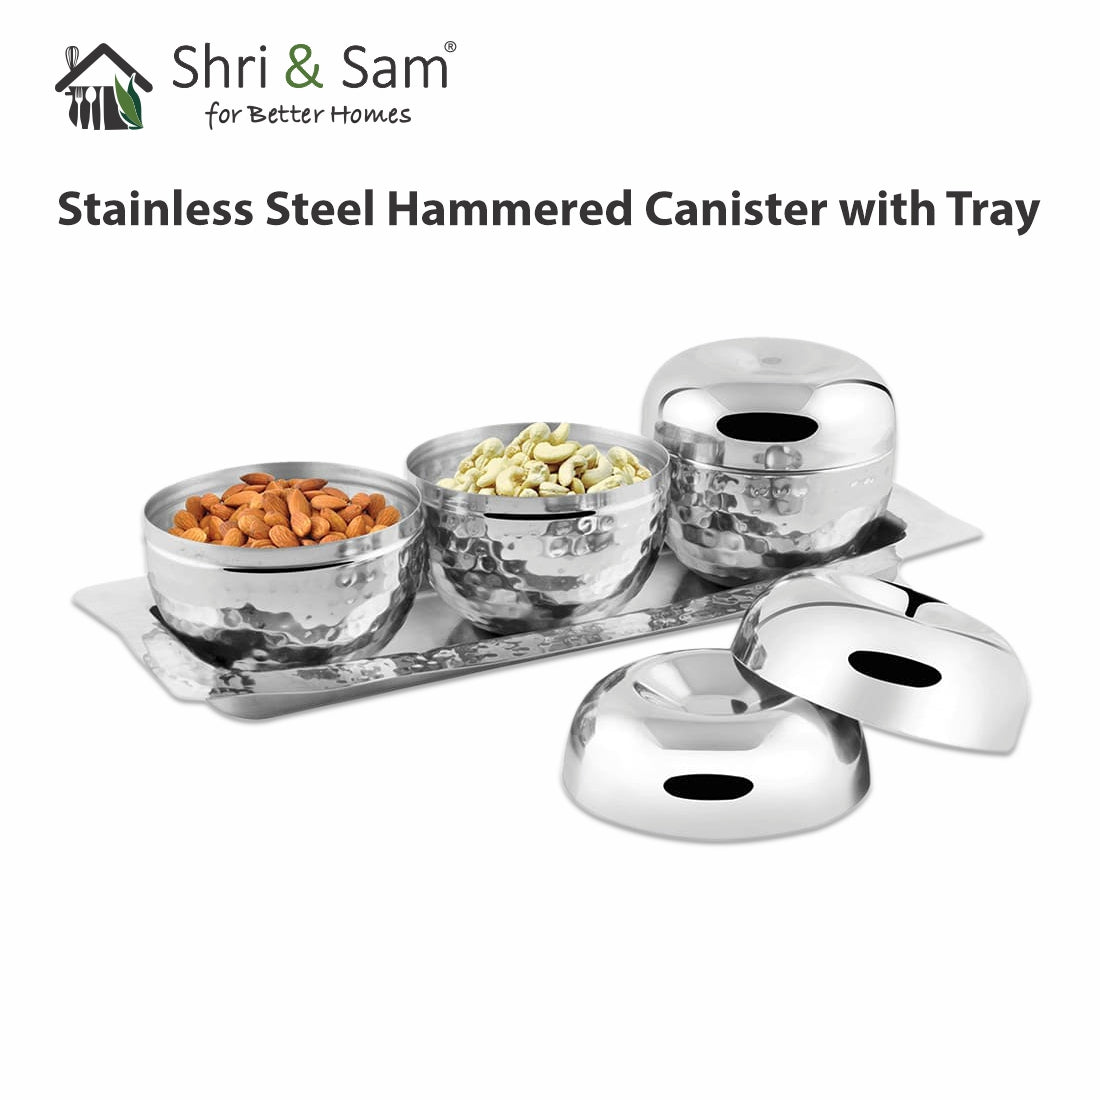 Stainless Steel Hammered Canister with Tray